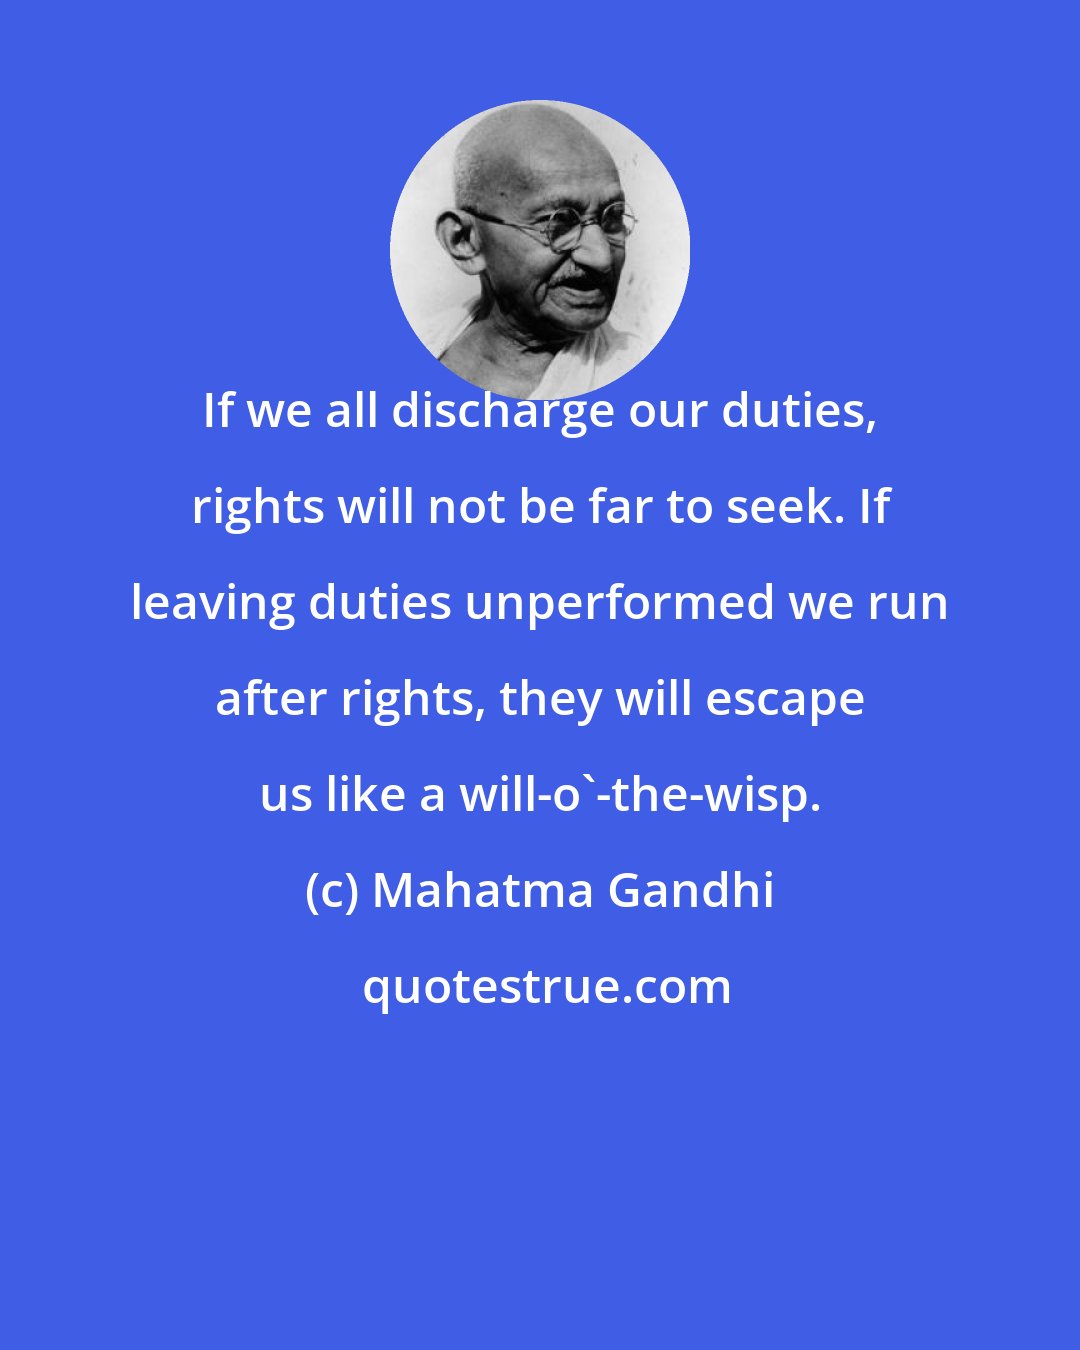 Mahatma Gandhi: If we all discharge our duties, rights will not be far to seek. If leaving duties unperformed we run after rights, they will escape us like a will-o'-the-wisp.